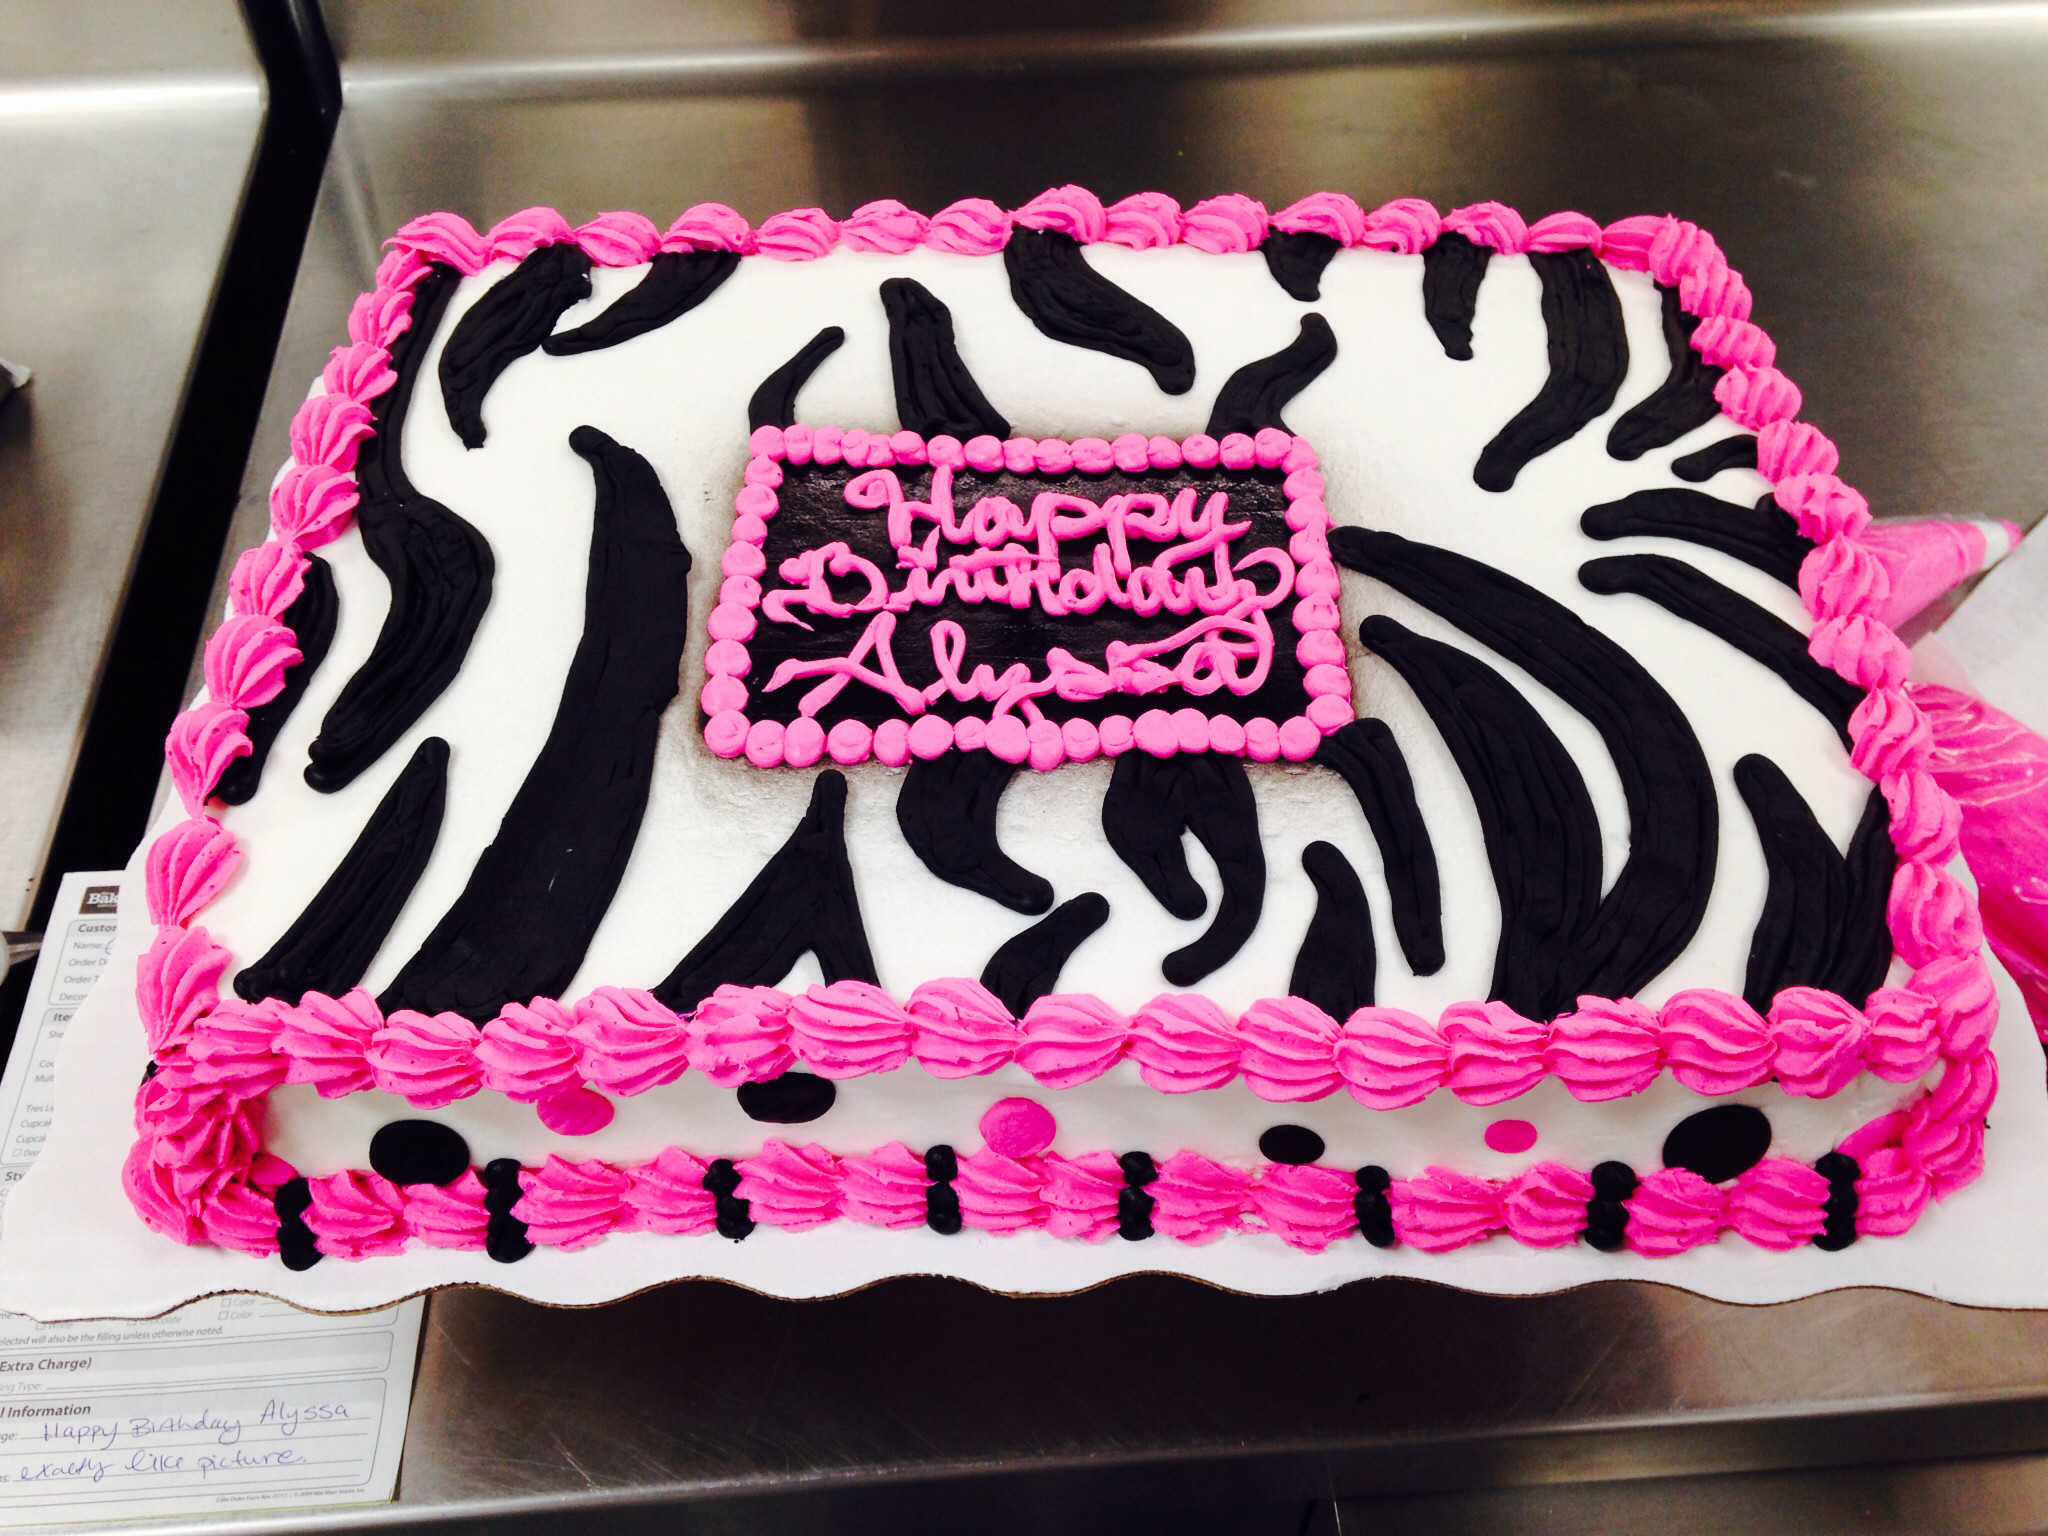 Birthday Cakes At Walmart Bakery
 Home Tips Kids Will Have A Fun With Walmart Cake Designs